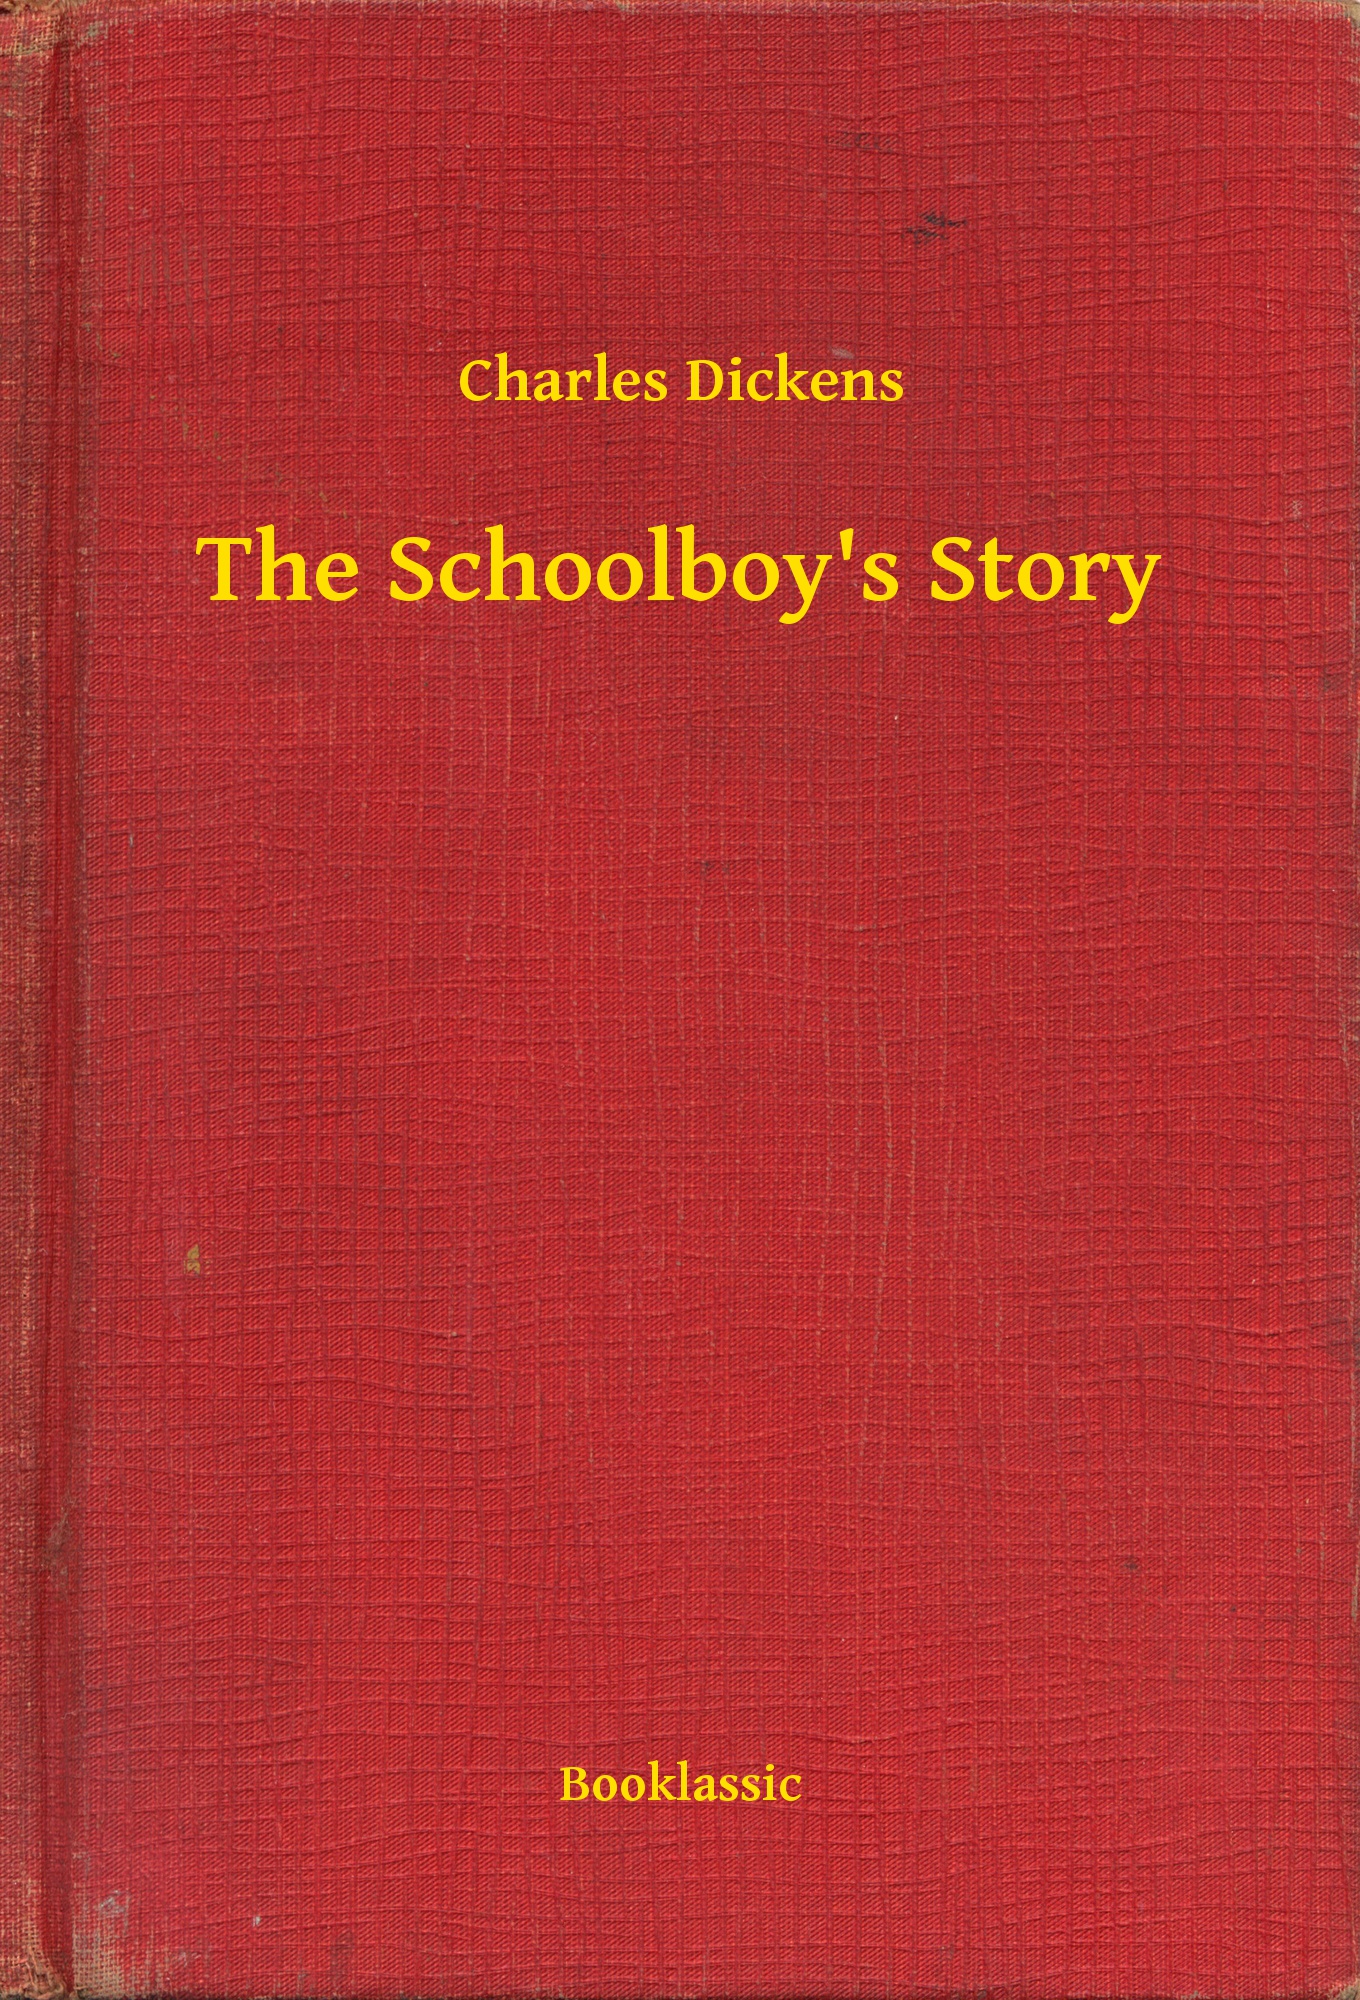 The Schoolboy"s Story